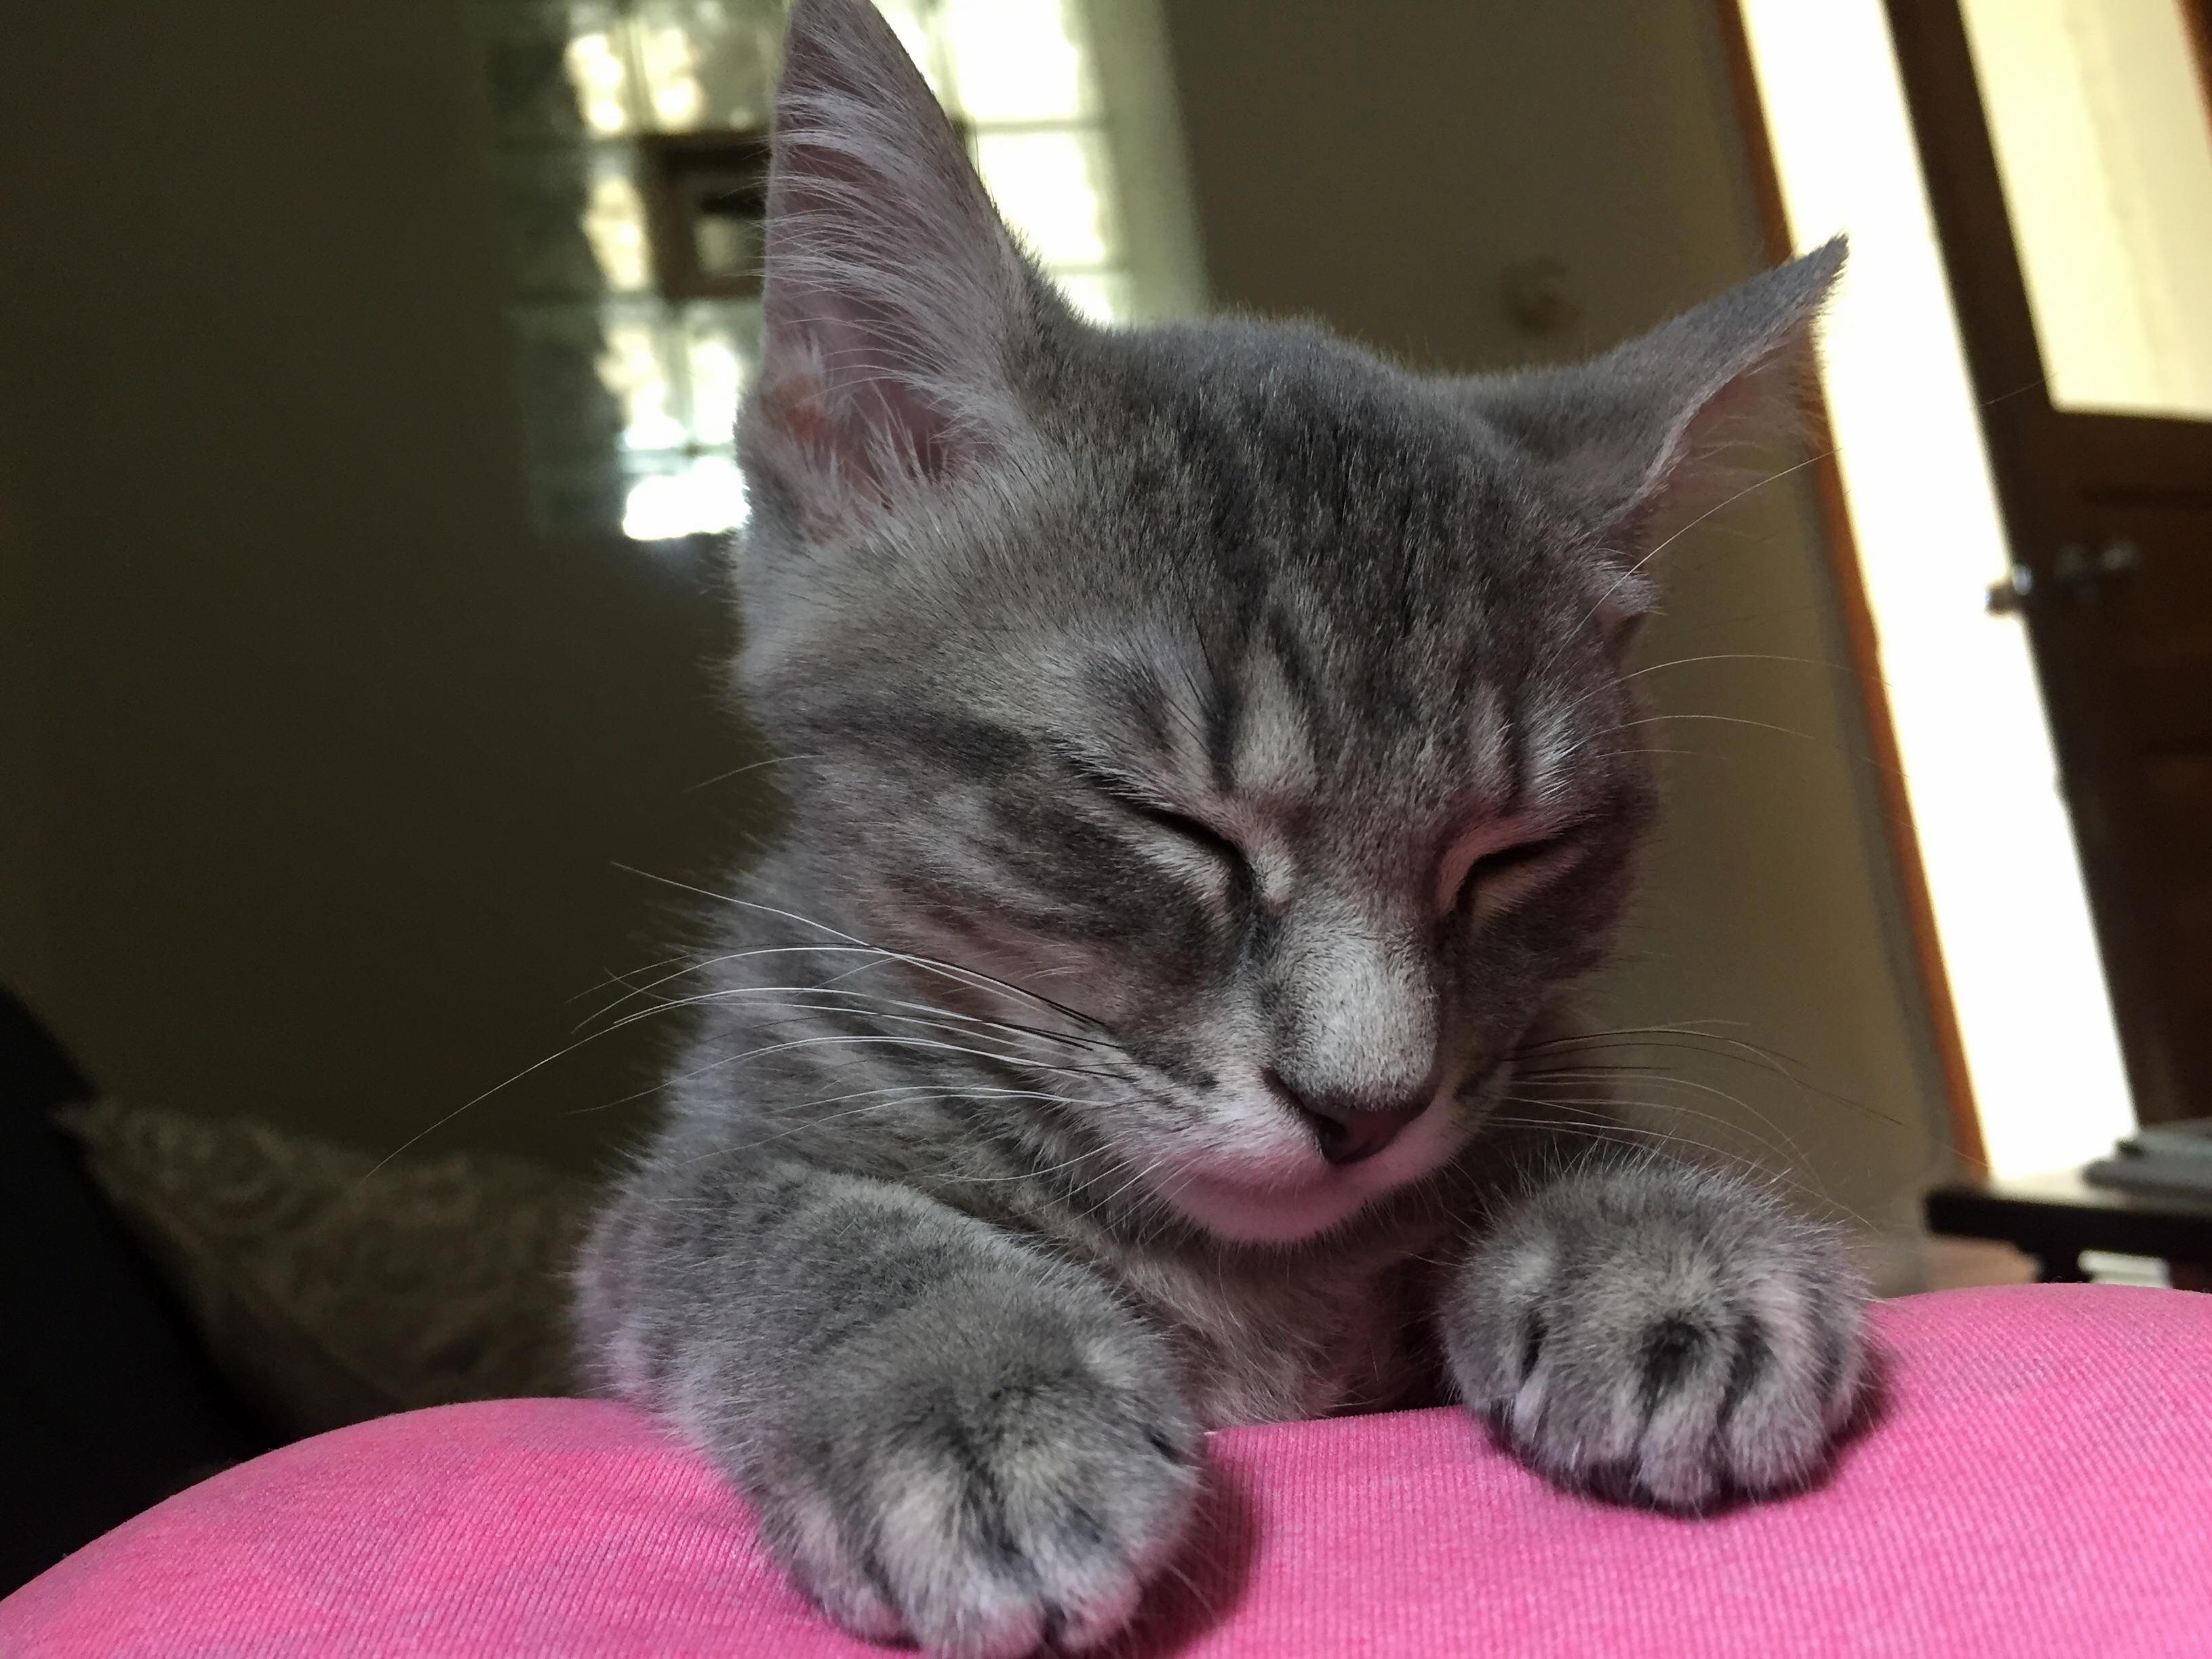 Pineapple the foster kitten sleeps after a long morning of terrorizing me and her sisters